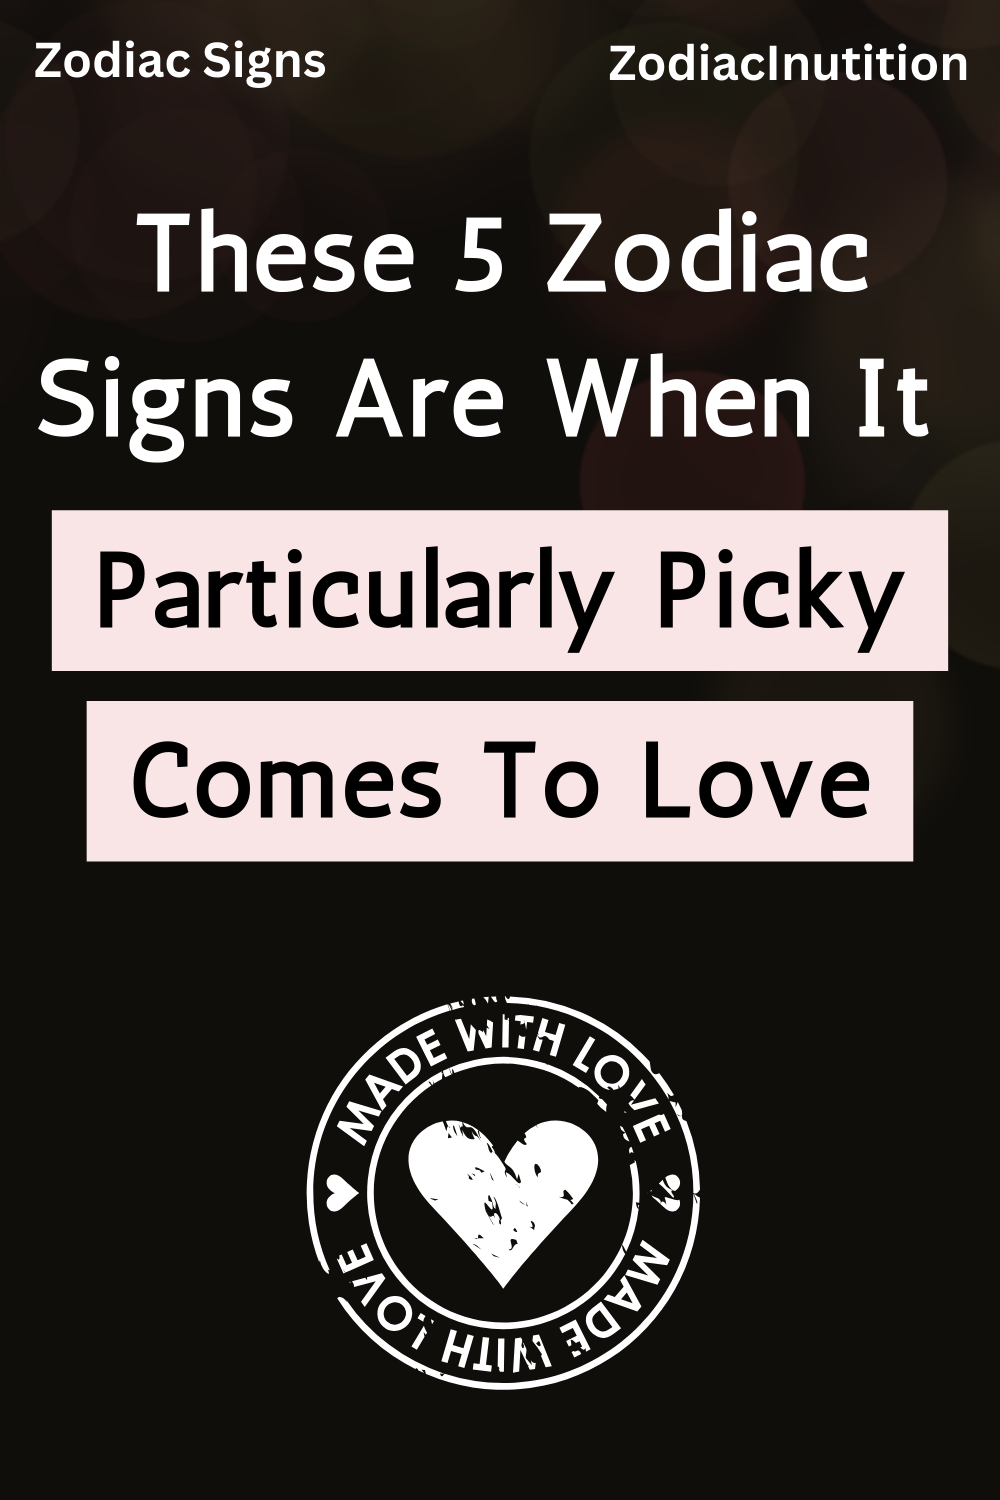 These 5 Zodiac Signs Are Particularly Picky When It Comes To Love